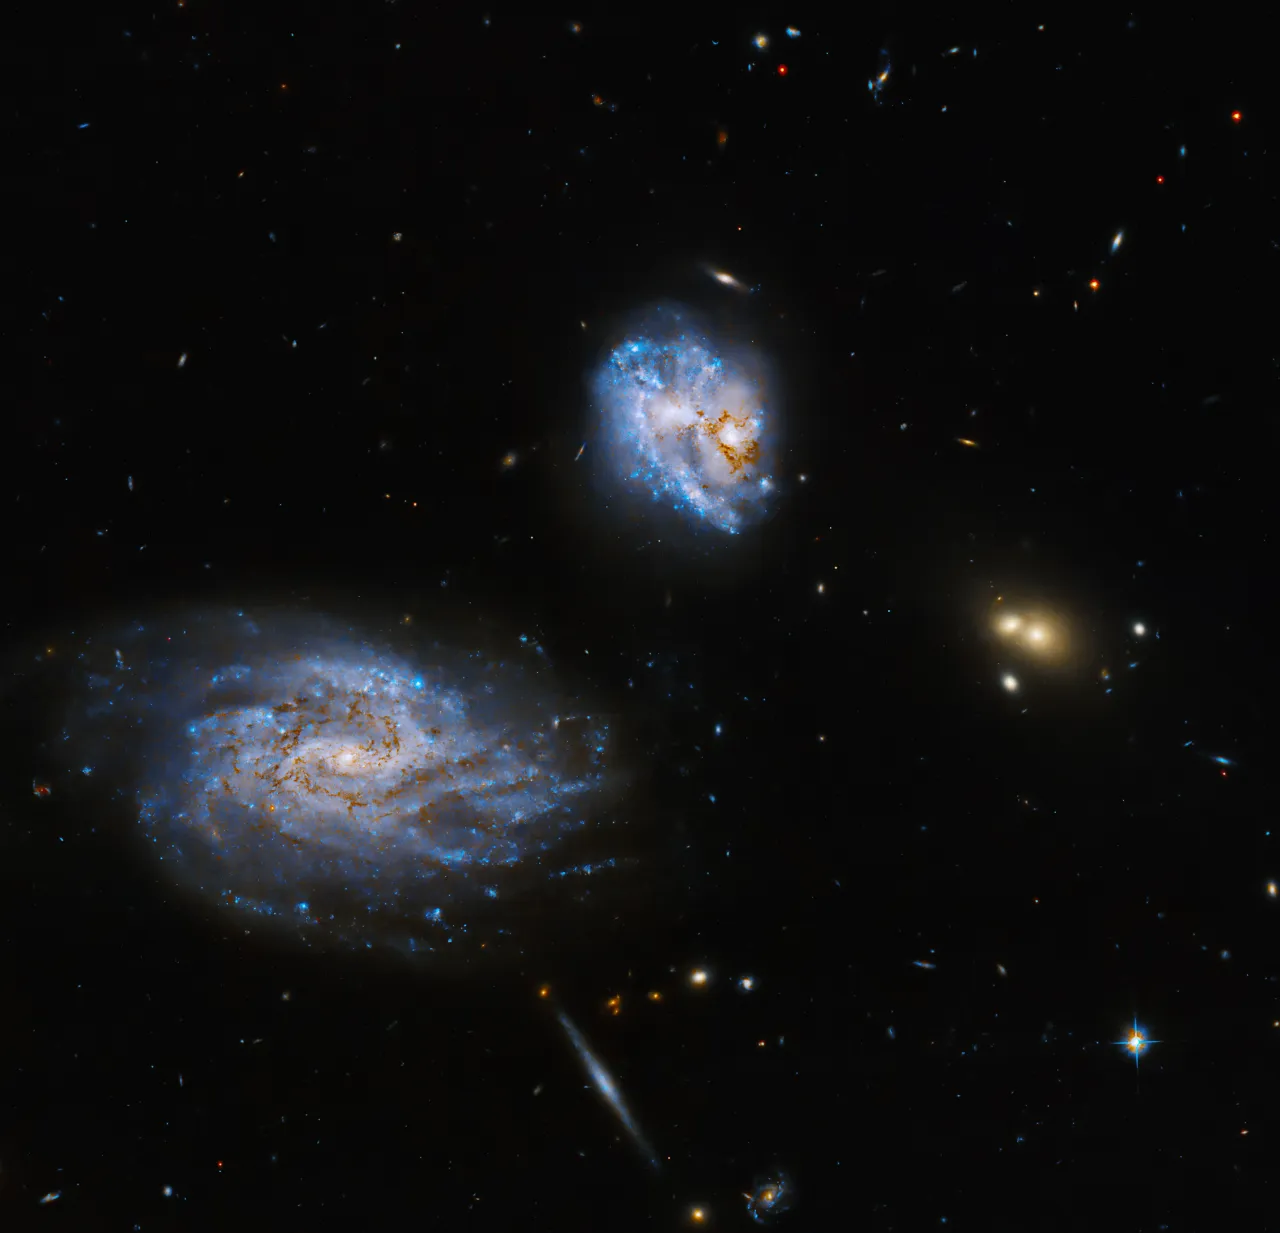 Hubble observes two interacting spiral galaxies